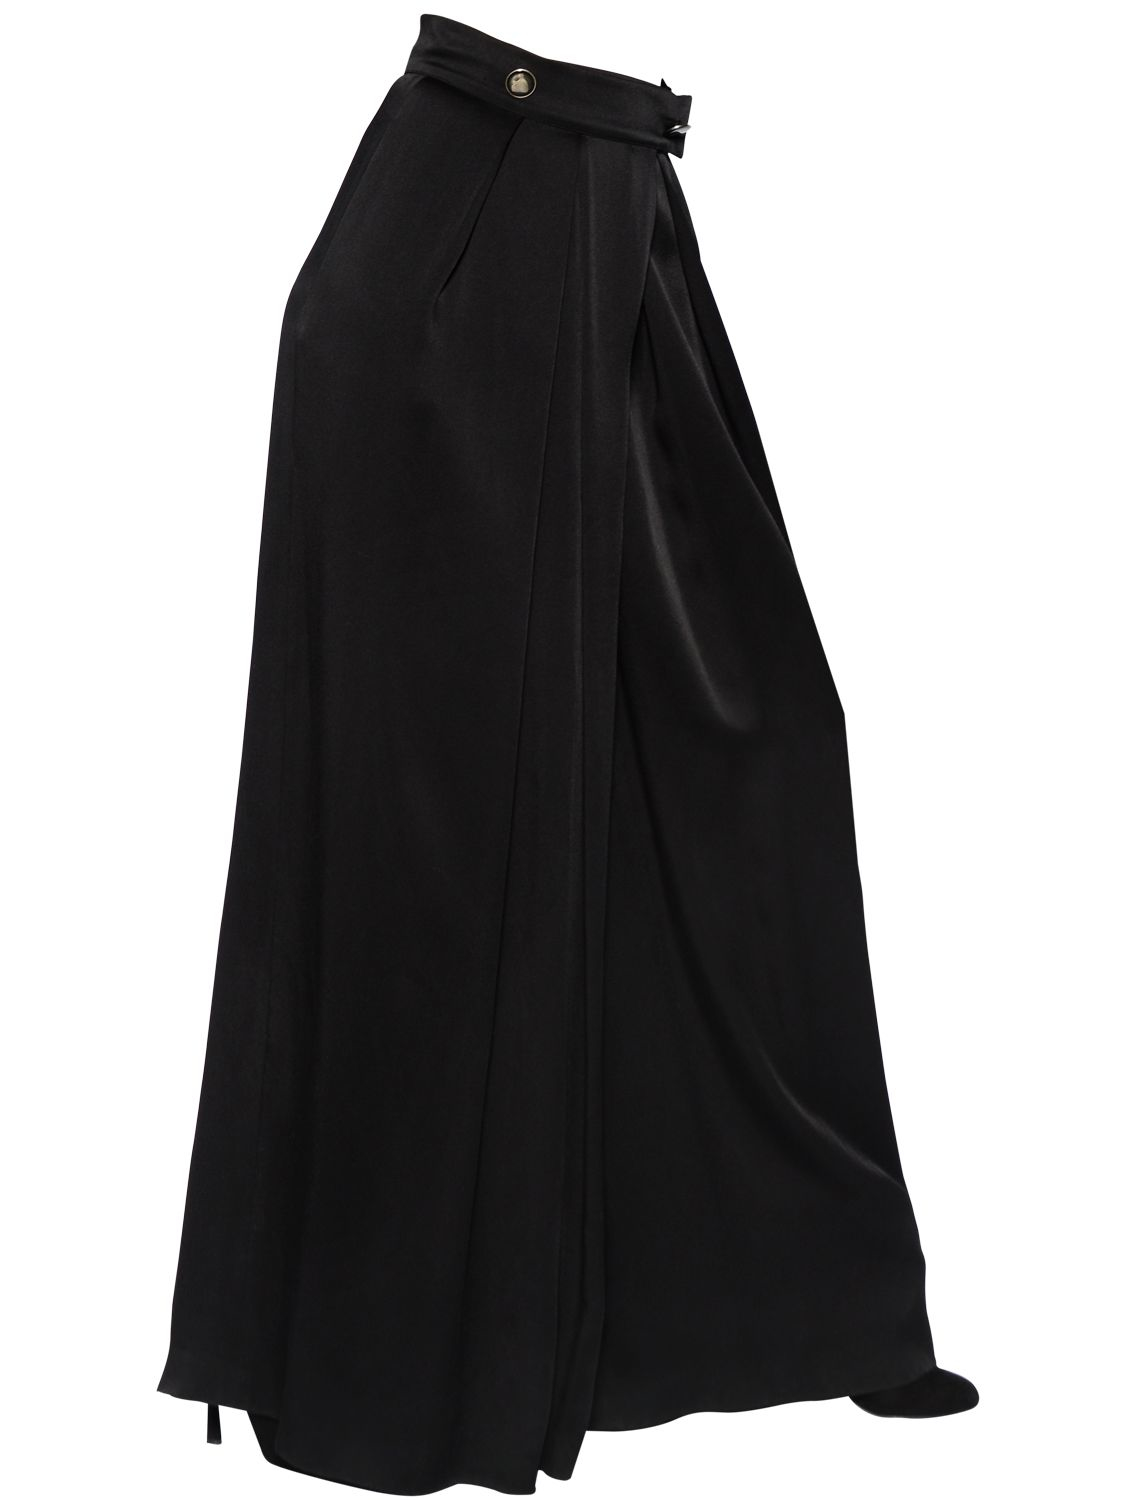 Lanvin High Waisted Satin Palazzo Pants in Black | Lyst